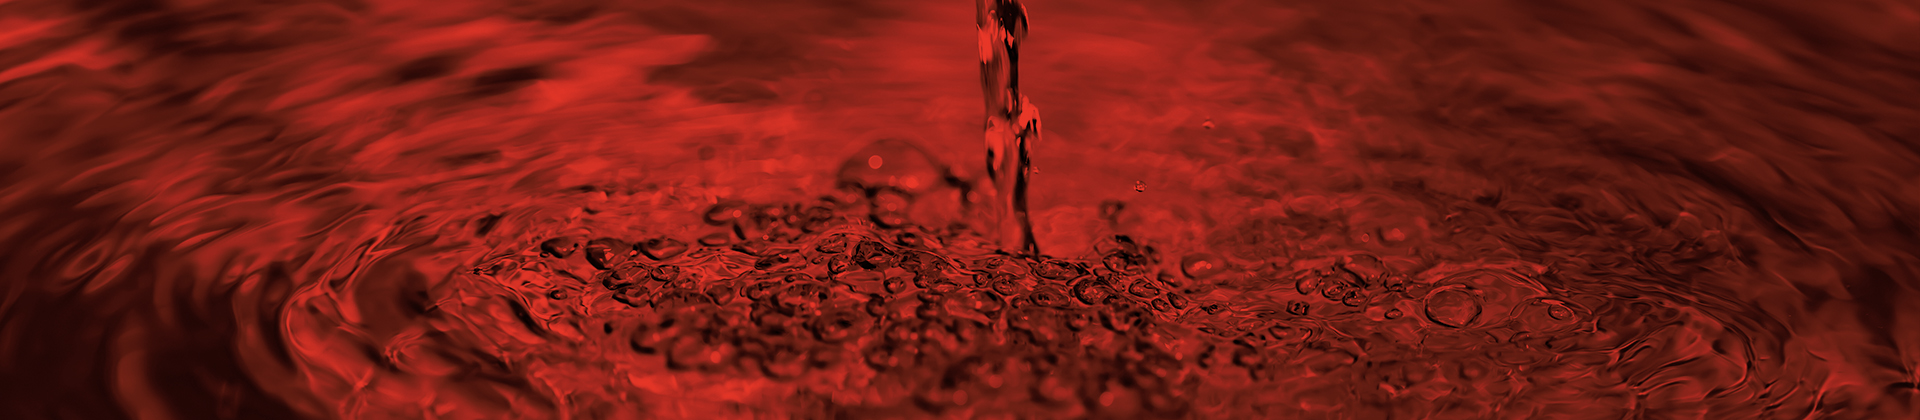 TrojanUVSpring banner water droplet with red overlay